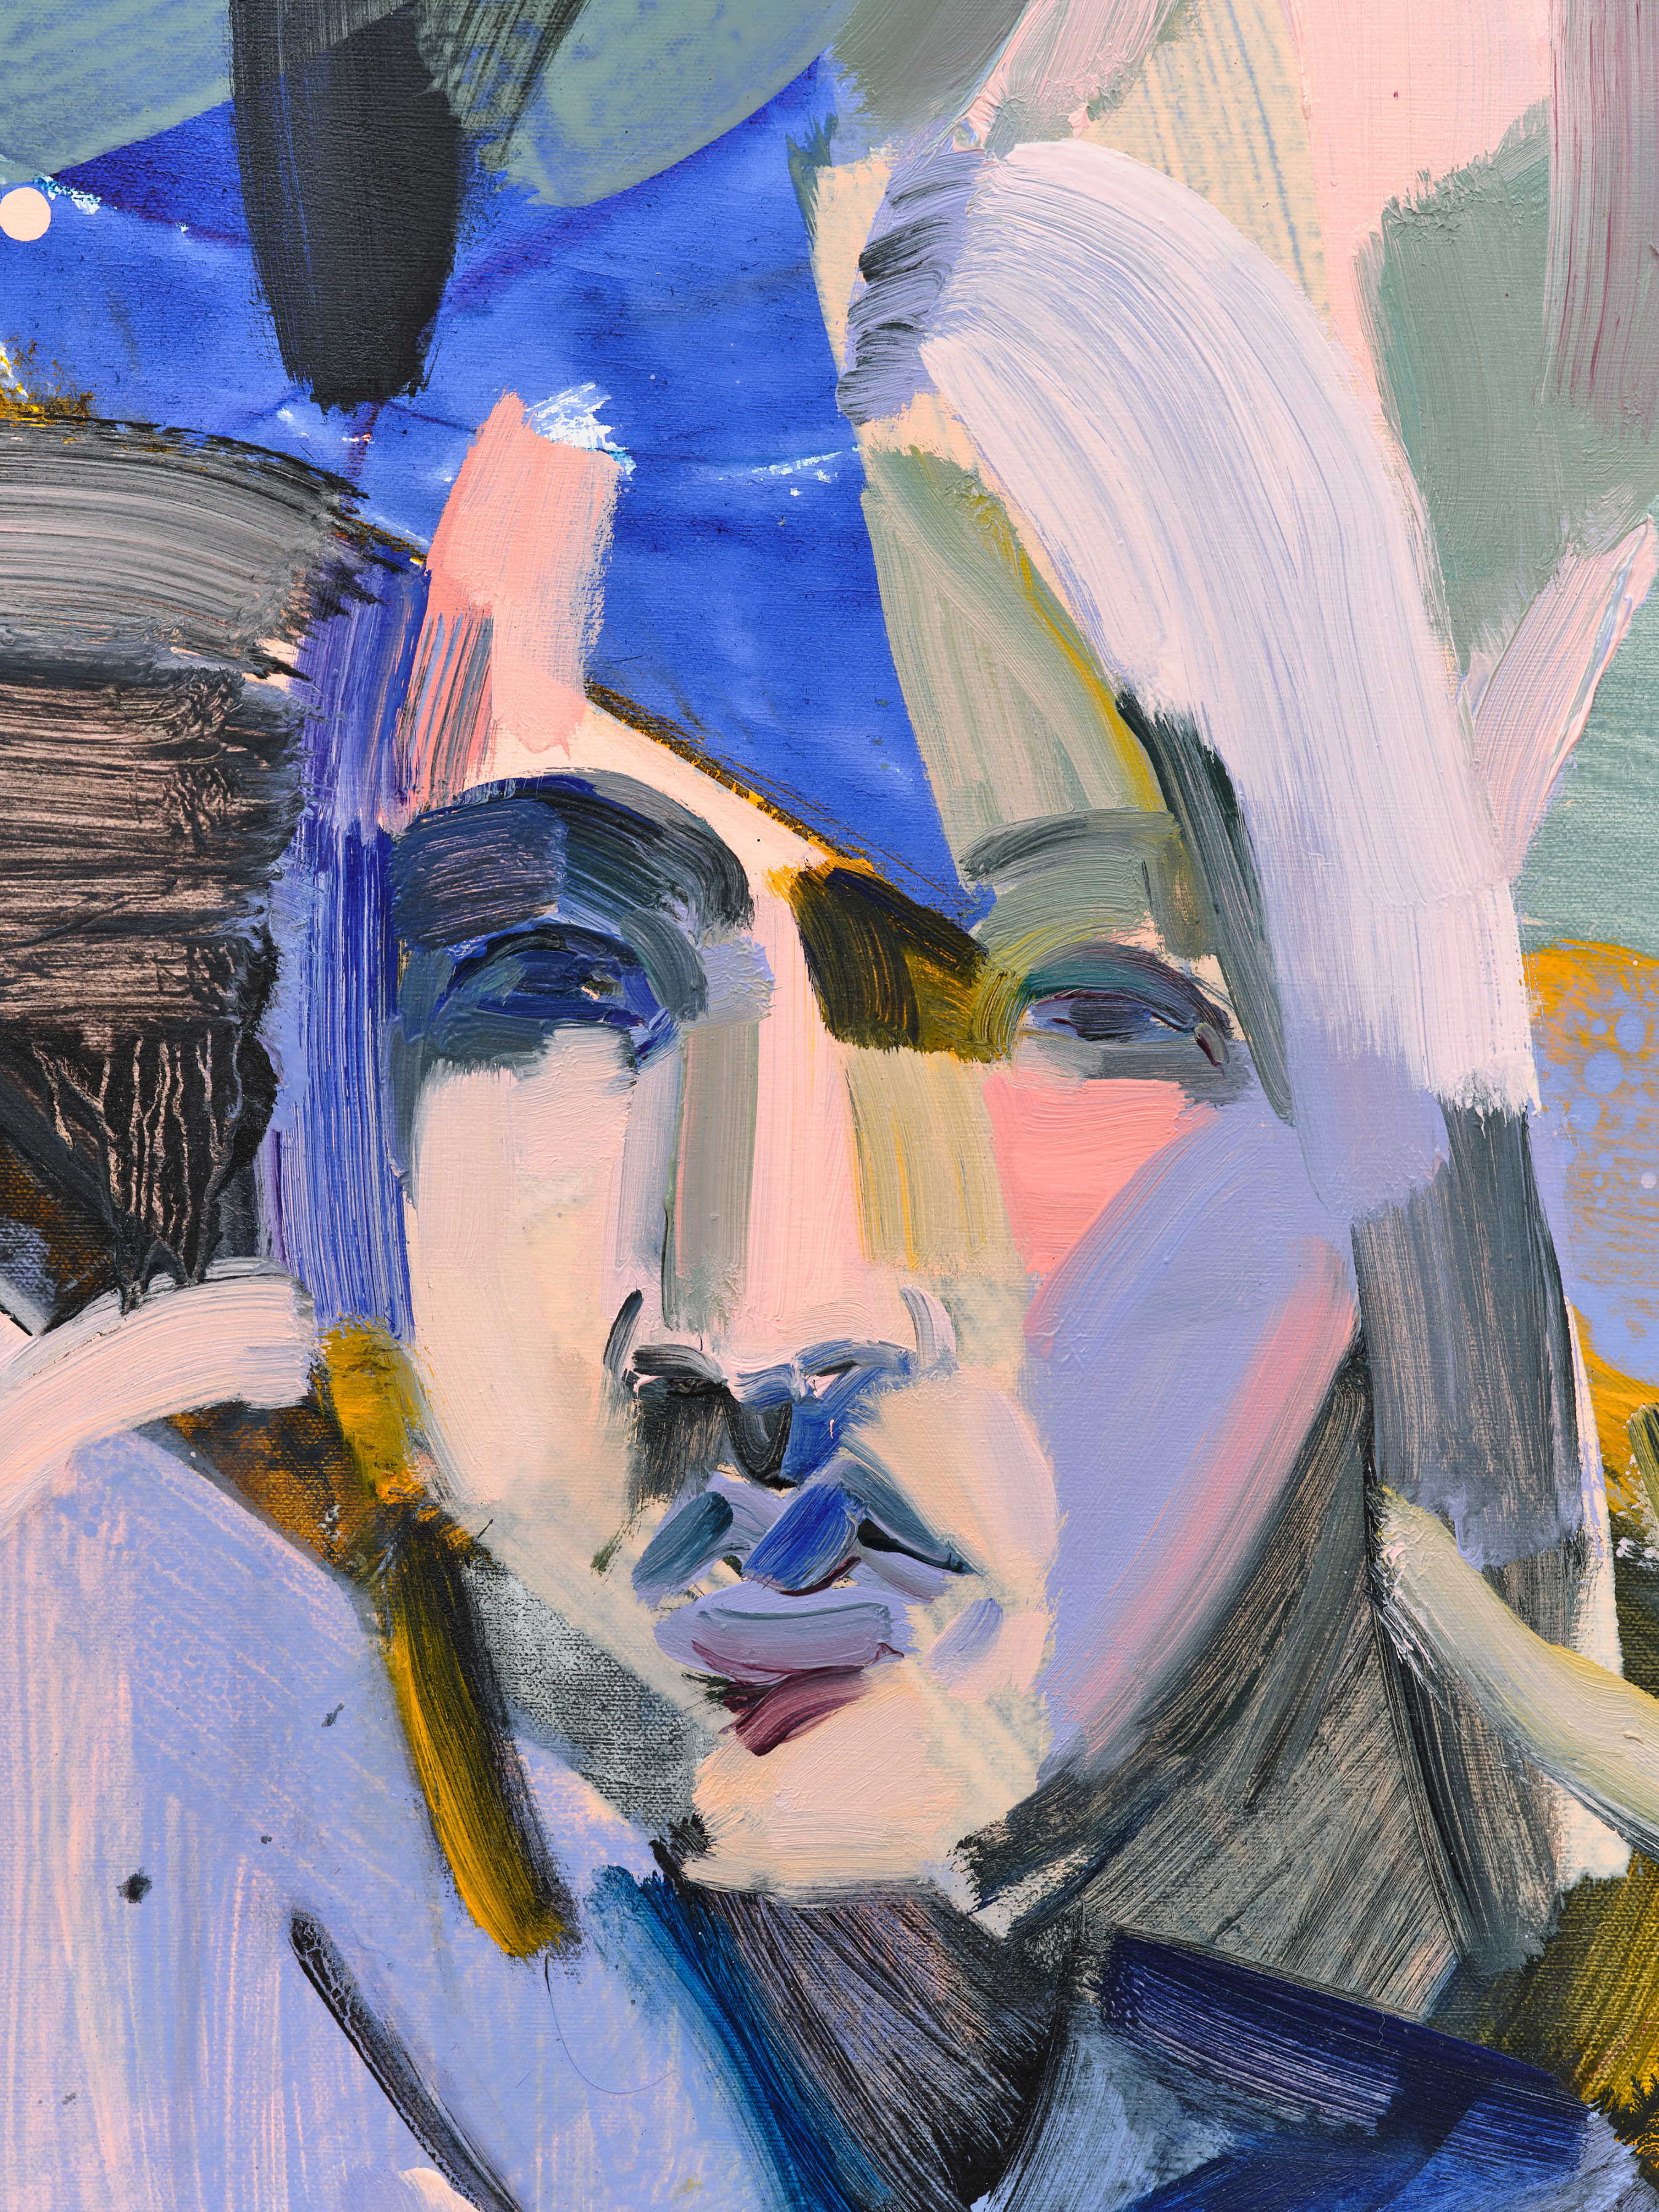 Detail of Sarah Awad's Illusion Dweller depicting a woman's face rendered in lavender, blush, blue and green.